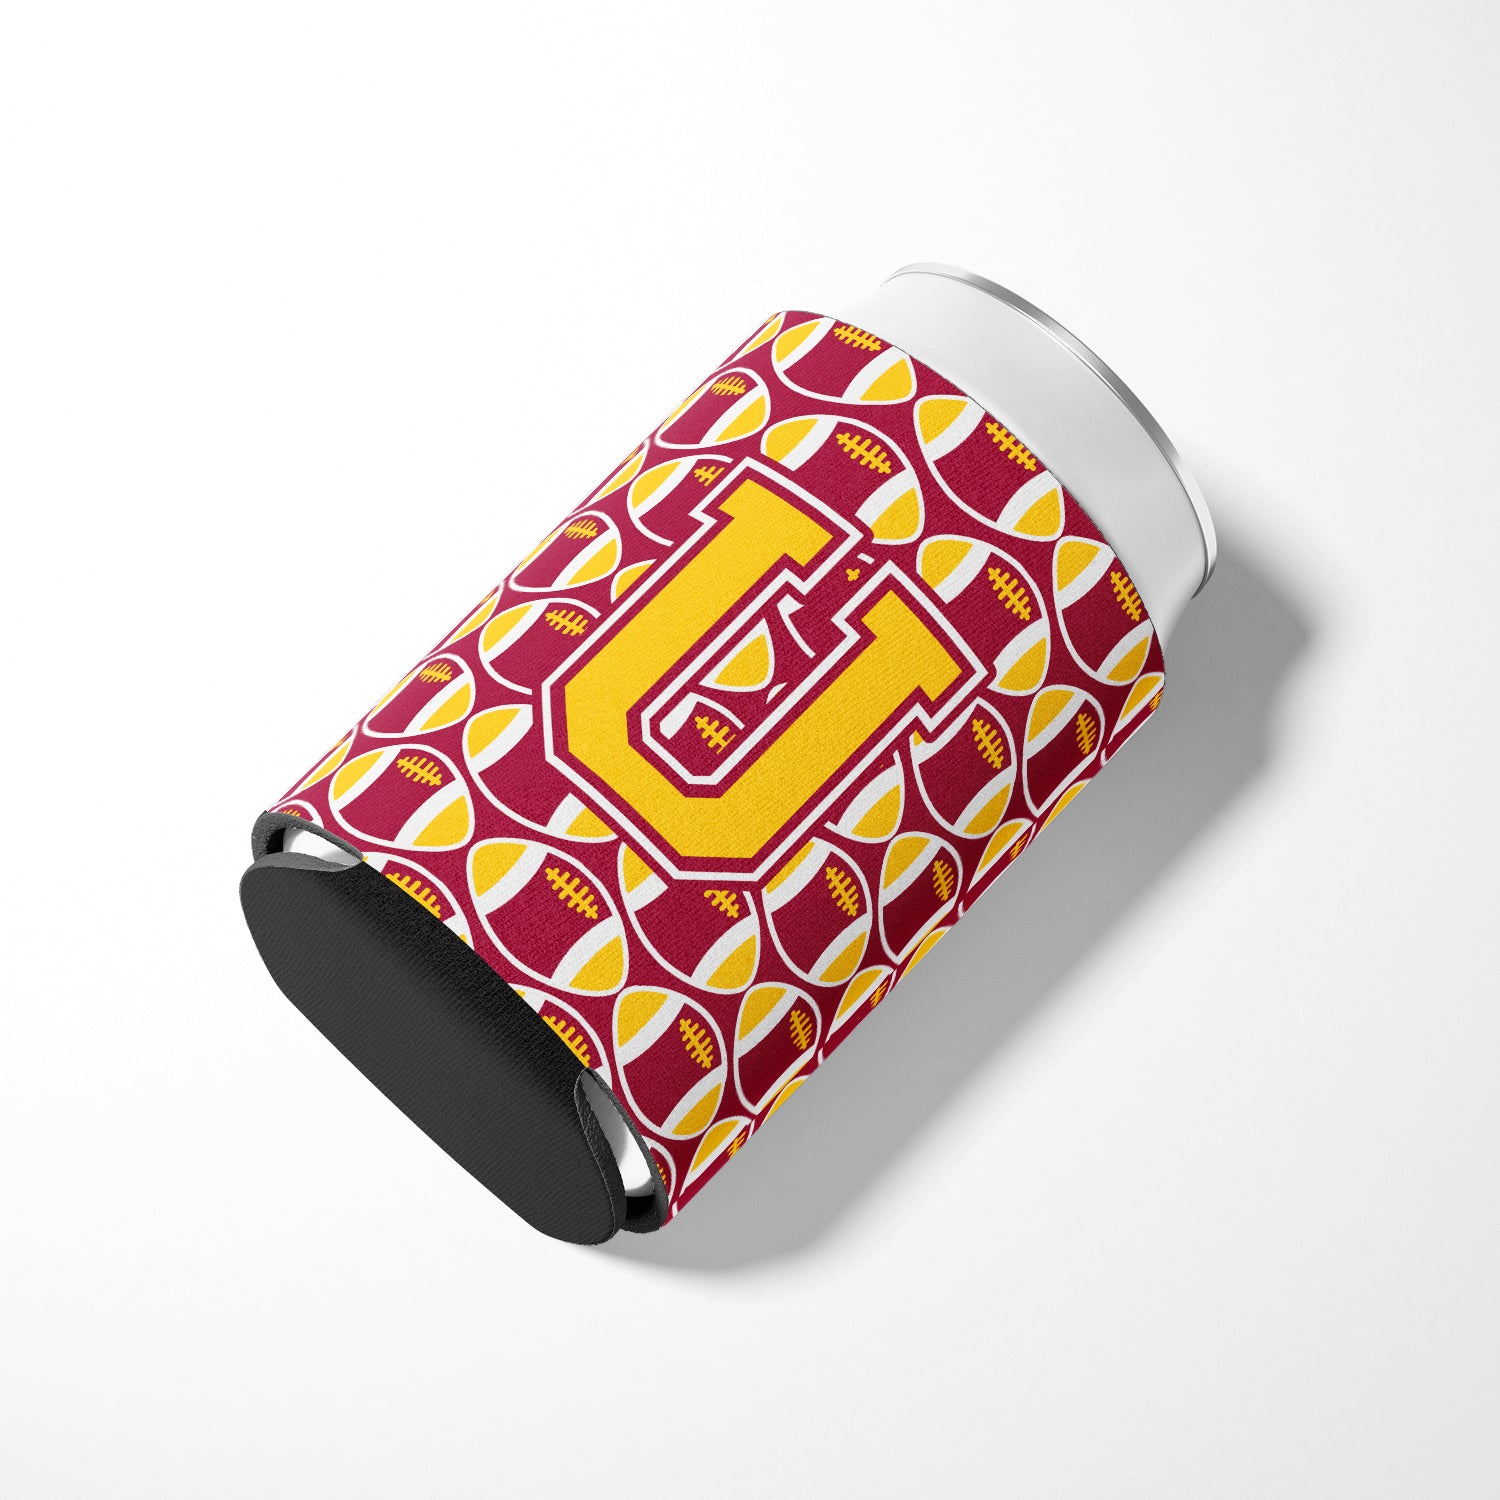 Letter U Football Maroon and Gold Can or Bottle Hugger CJ1081-UCC.